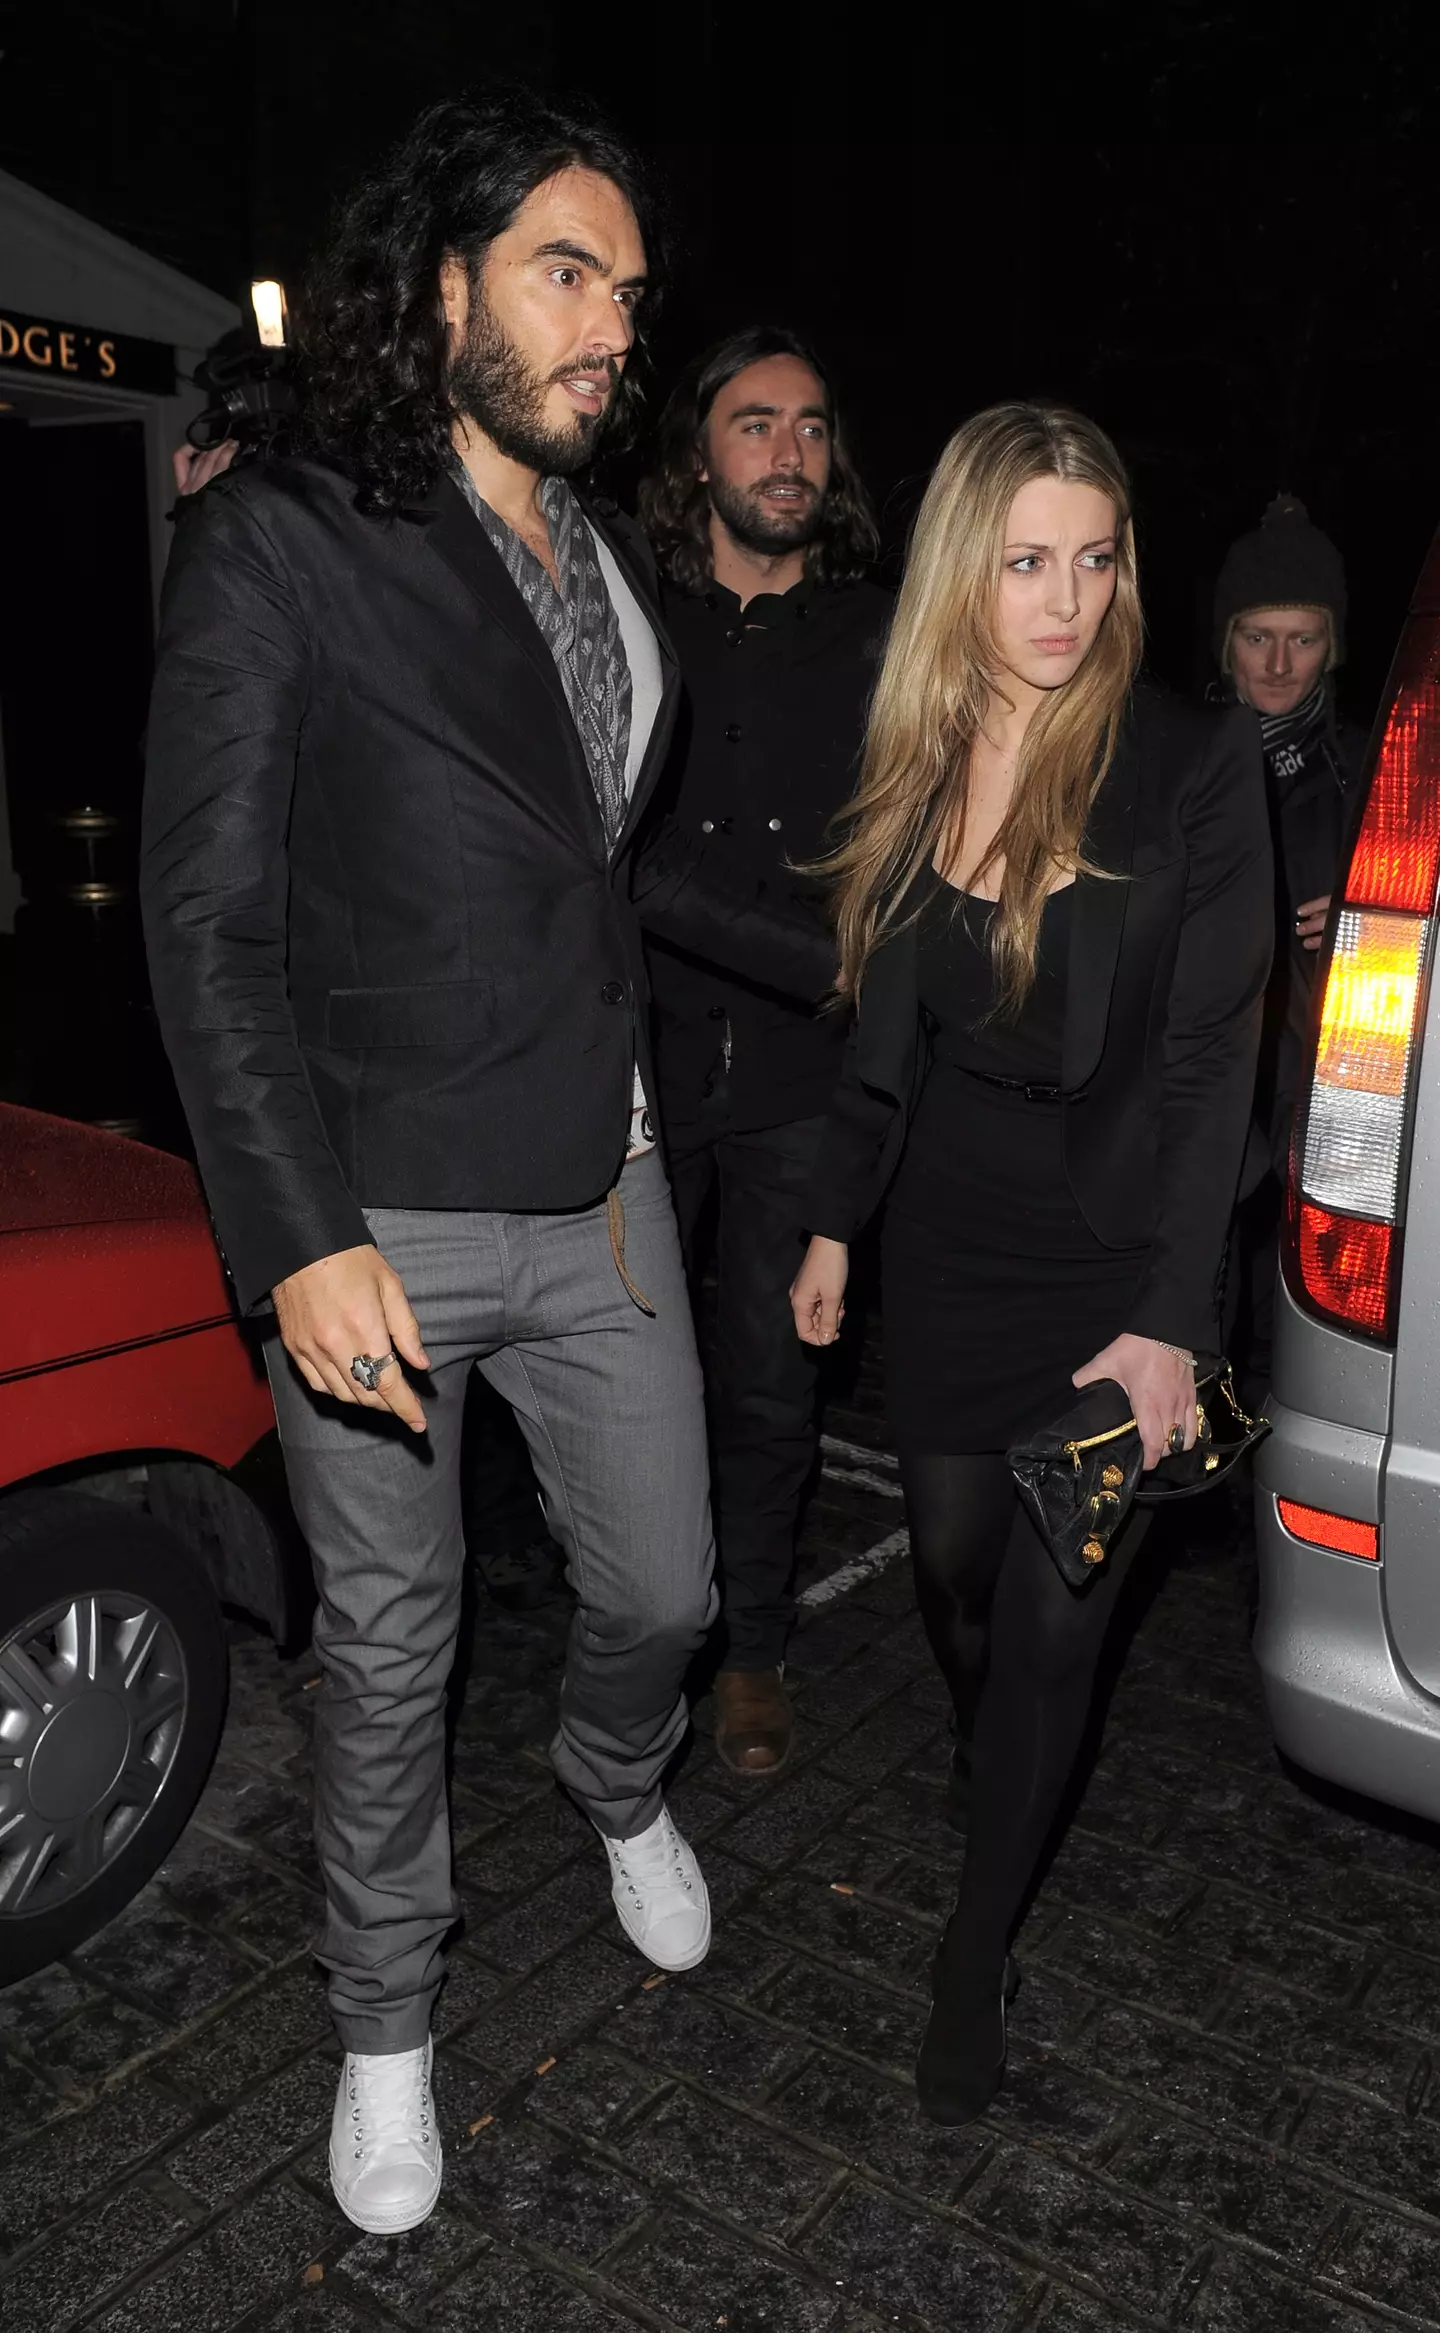 Russell Brand and Laura Gallacher married in 2017 and have two kids together.